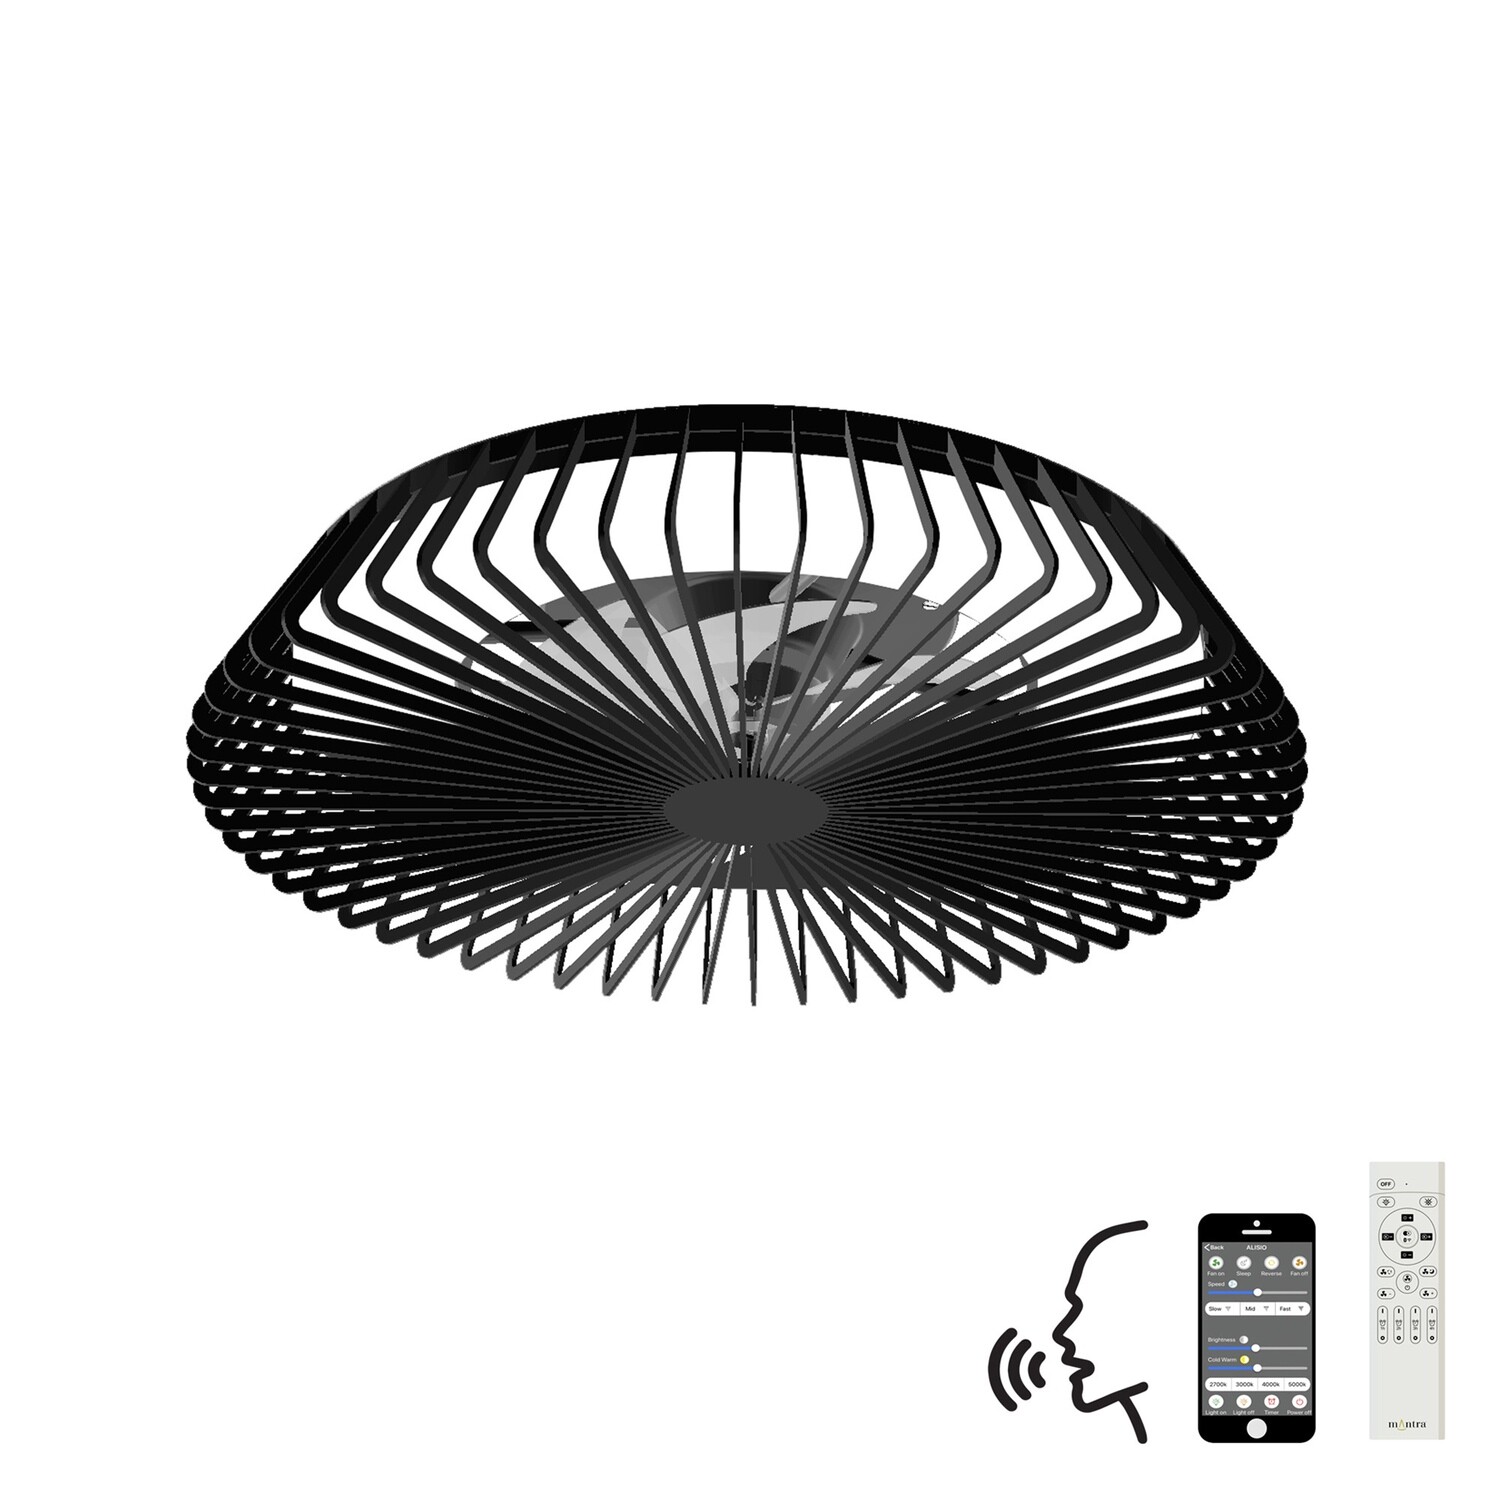 Himalaya 70W LED Dimmable Ceiling Light With Built-In 35W DC Fan, c/w Remote Control, APP & Alexa/Google Voice Control, 4900lm, Black